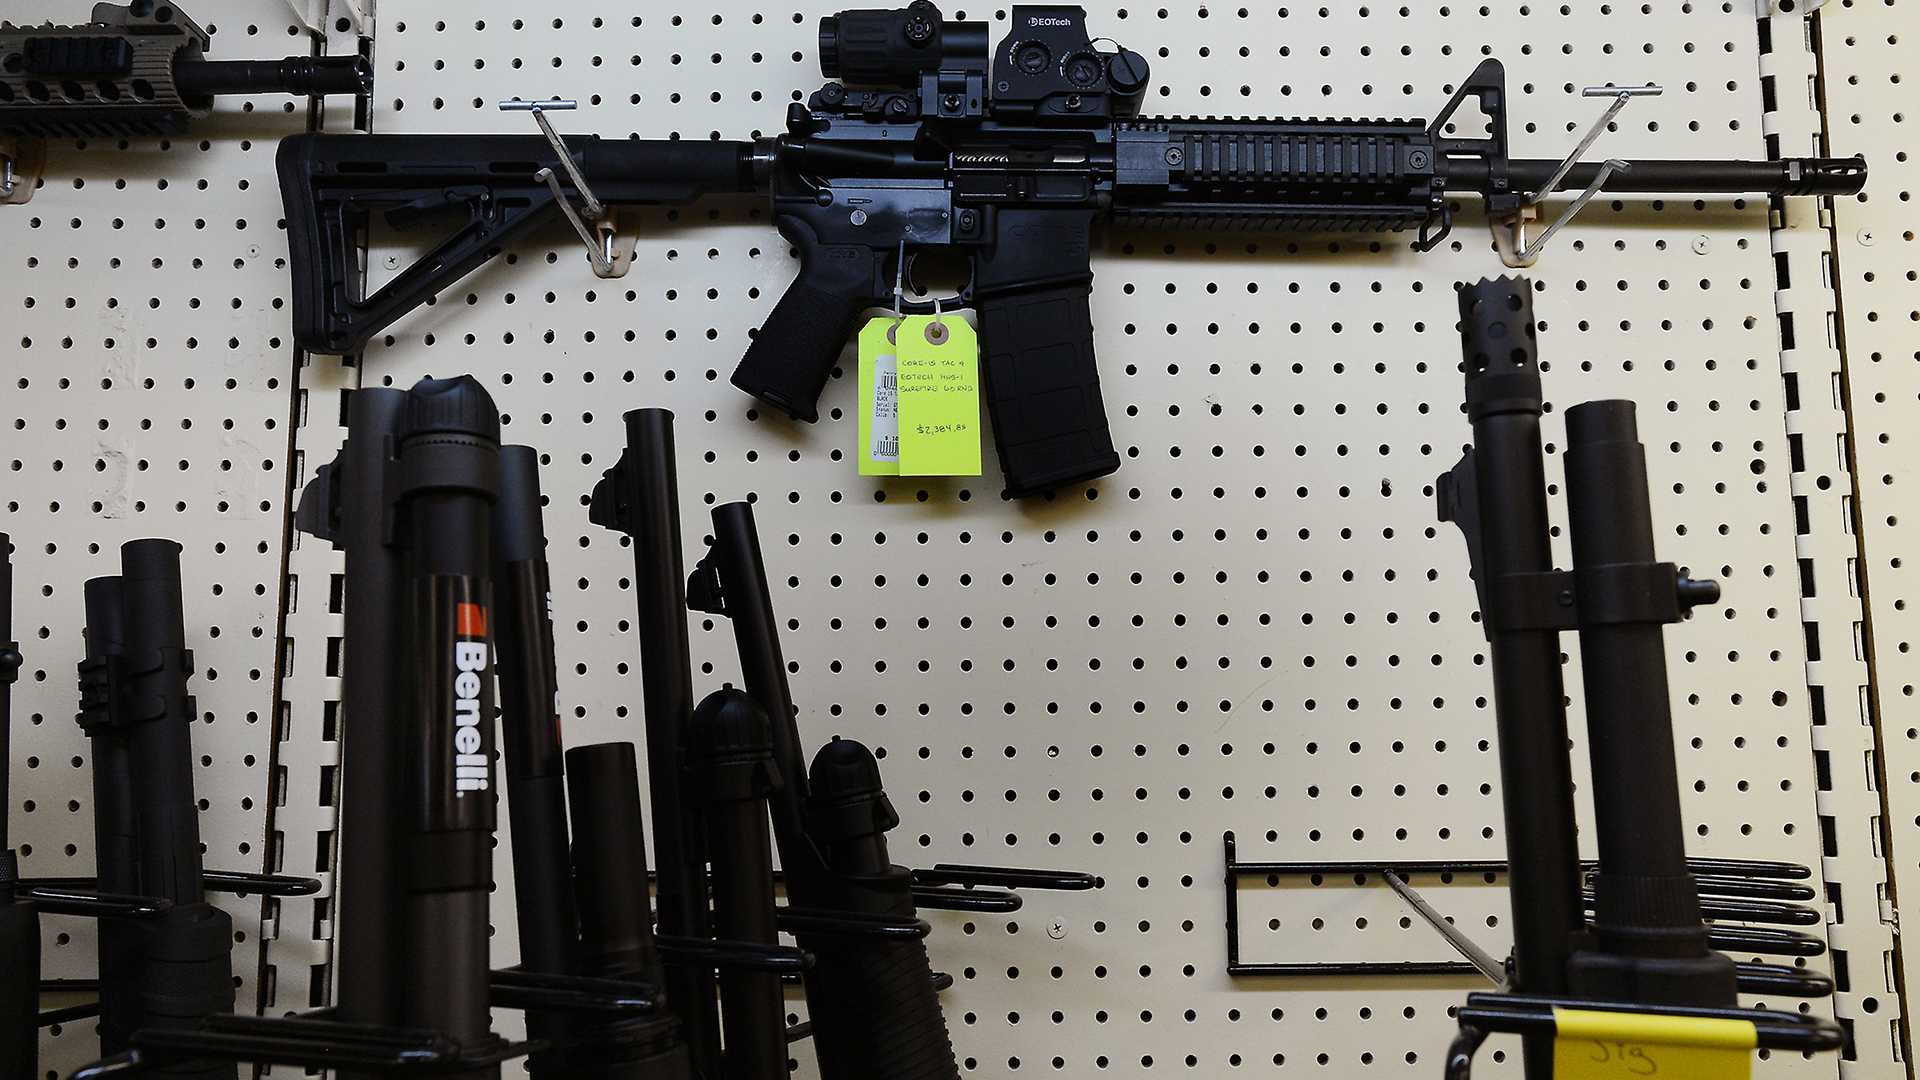 On display at Perrys Gun Shop in Wendell, North Carolina, an AR-15 assault rifle manufactured by Core15 Rifle Systems. The weapon costs $2,384 and features an EoTech optical sighting system and a 30-round magazine capacity. (Chuck Liddy/Raleigh News & Observer/MCT)